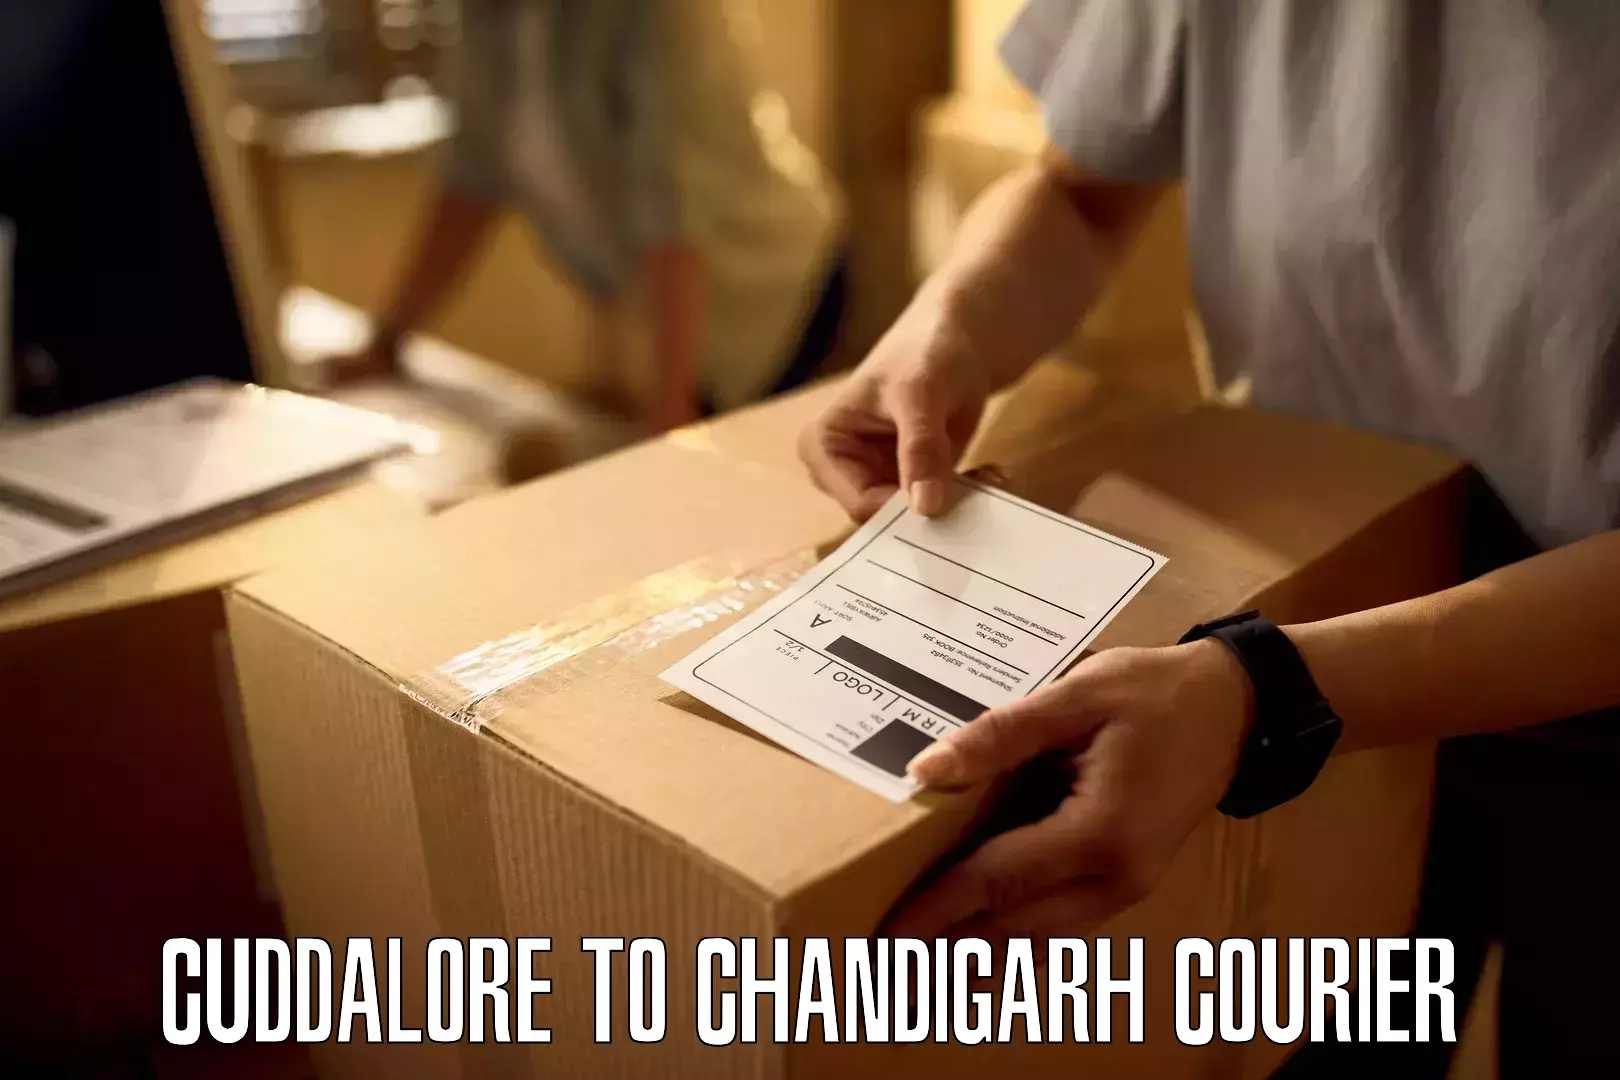 User-friendly delivery service Cuddalore to Chandigarh